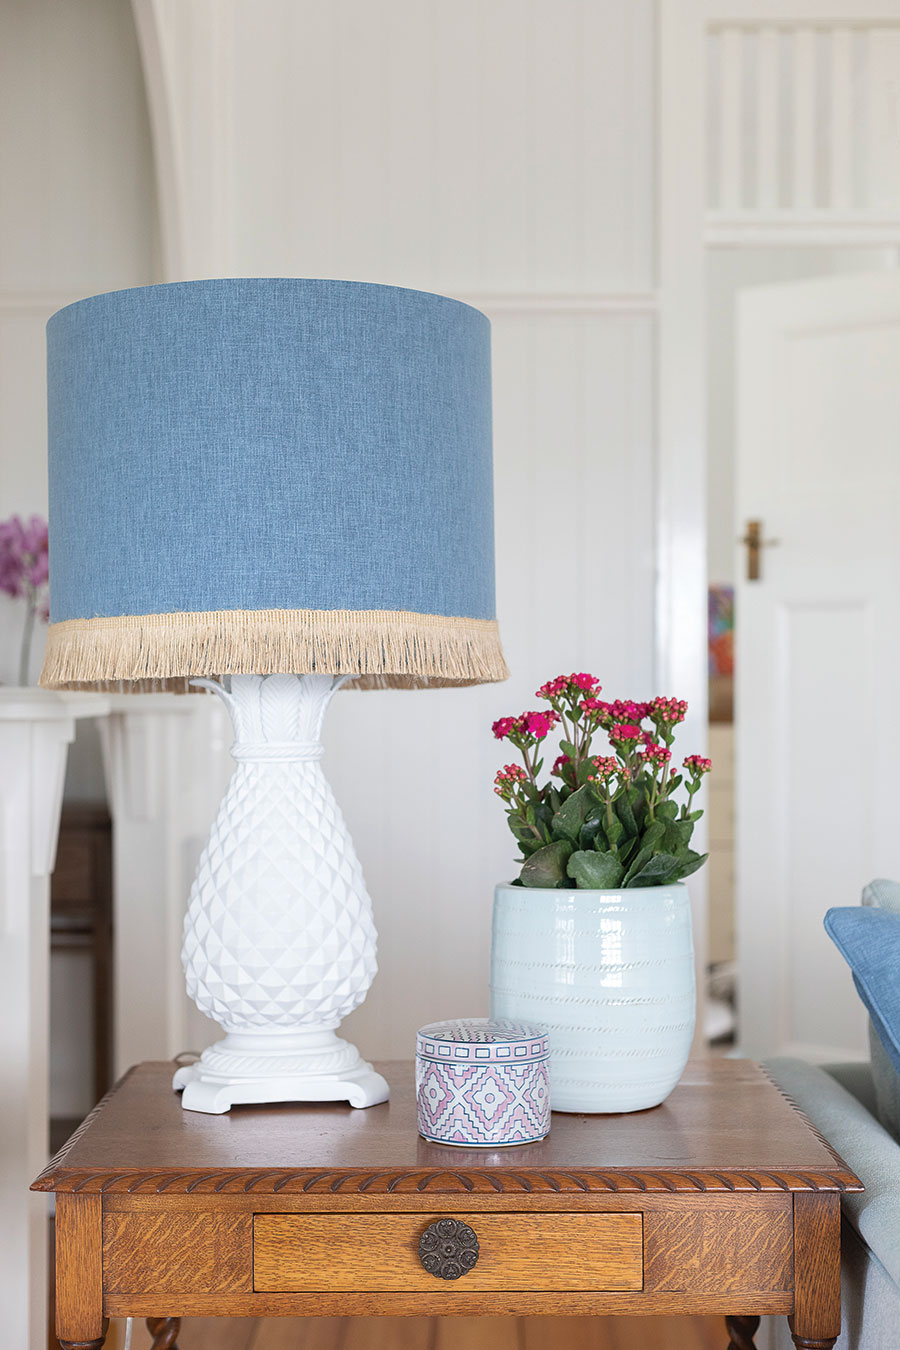 Rylo Co. lampshade